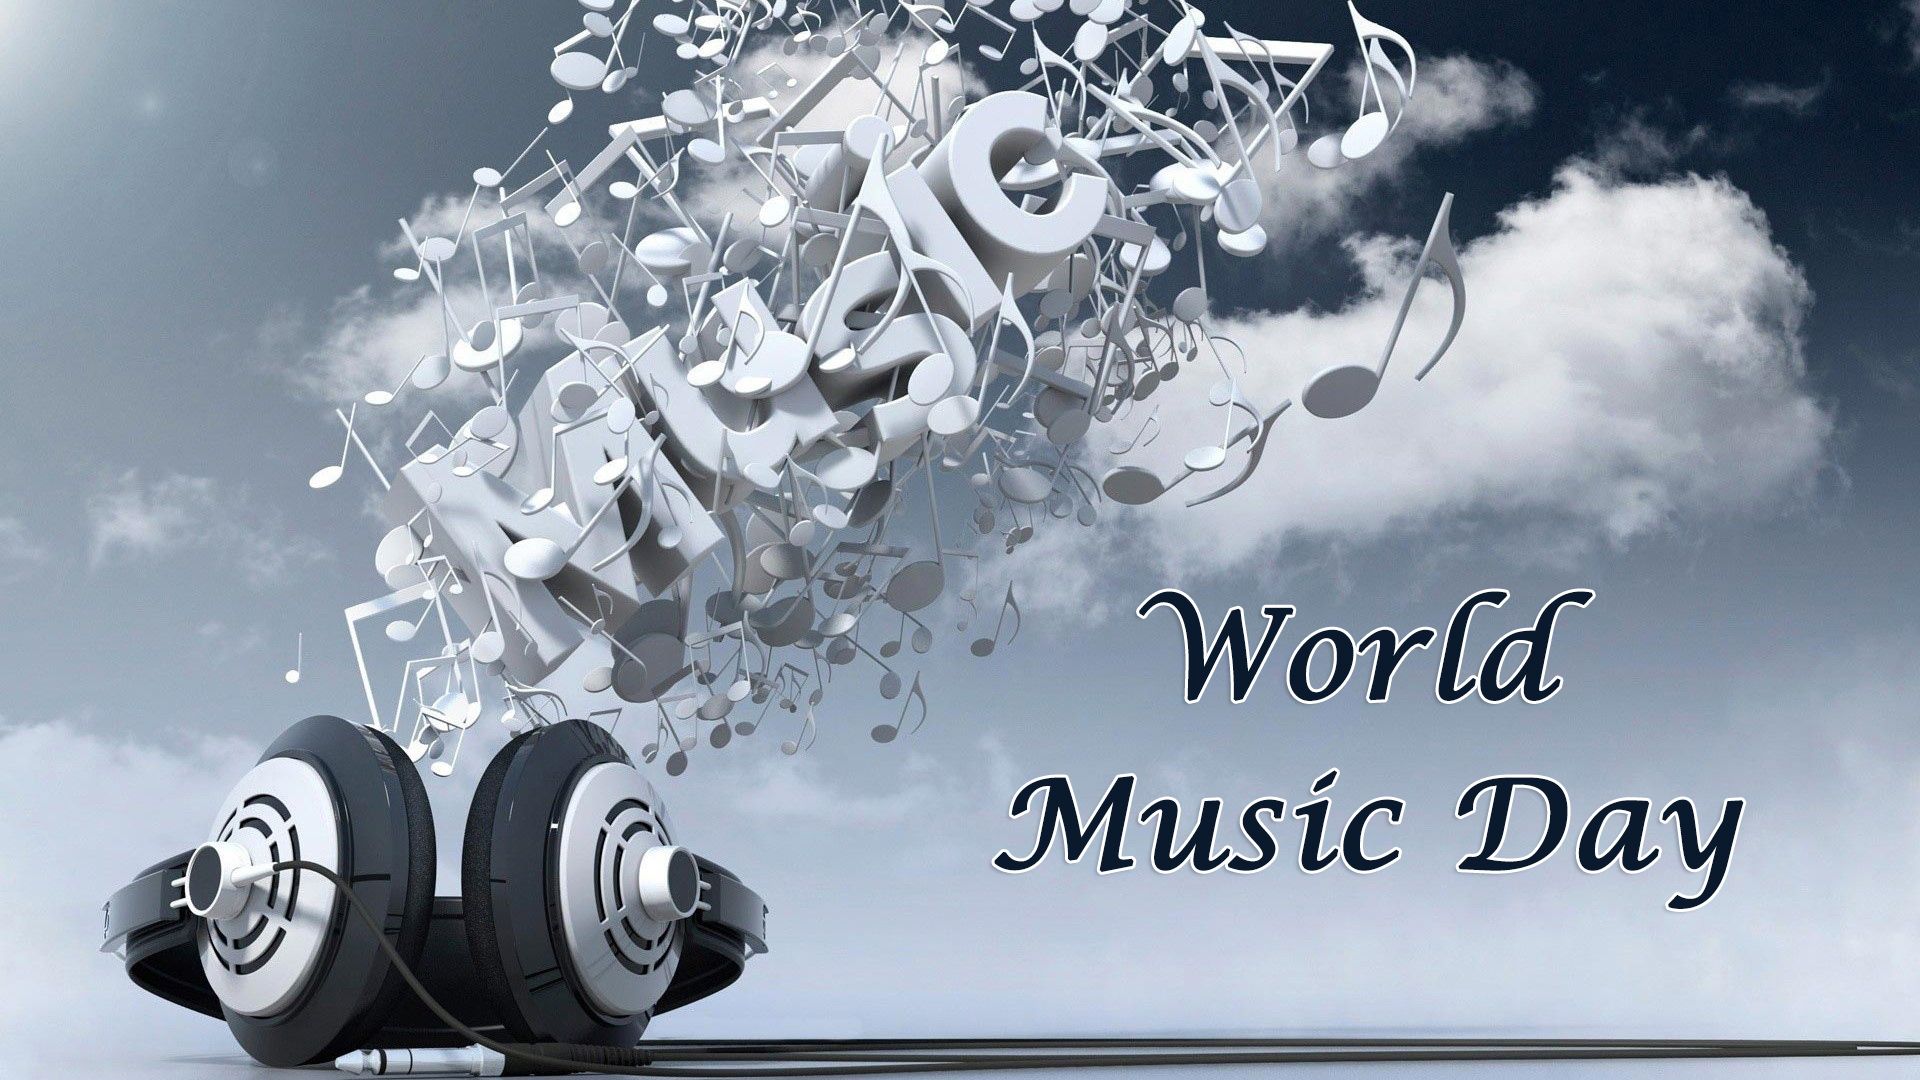 Free download World Music Day greetings wallpaper [1920x1080]